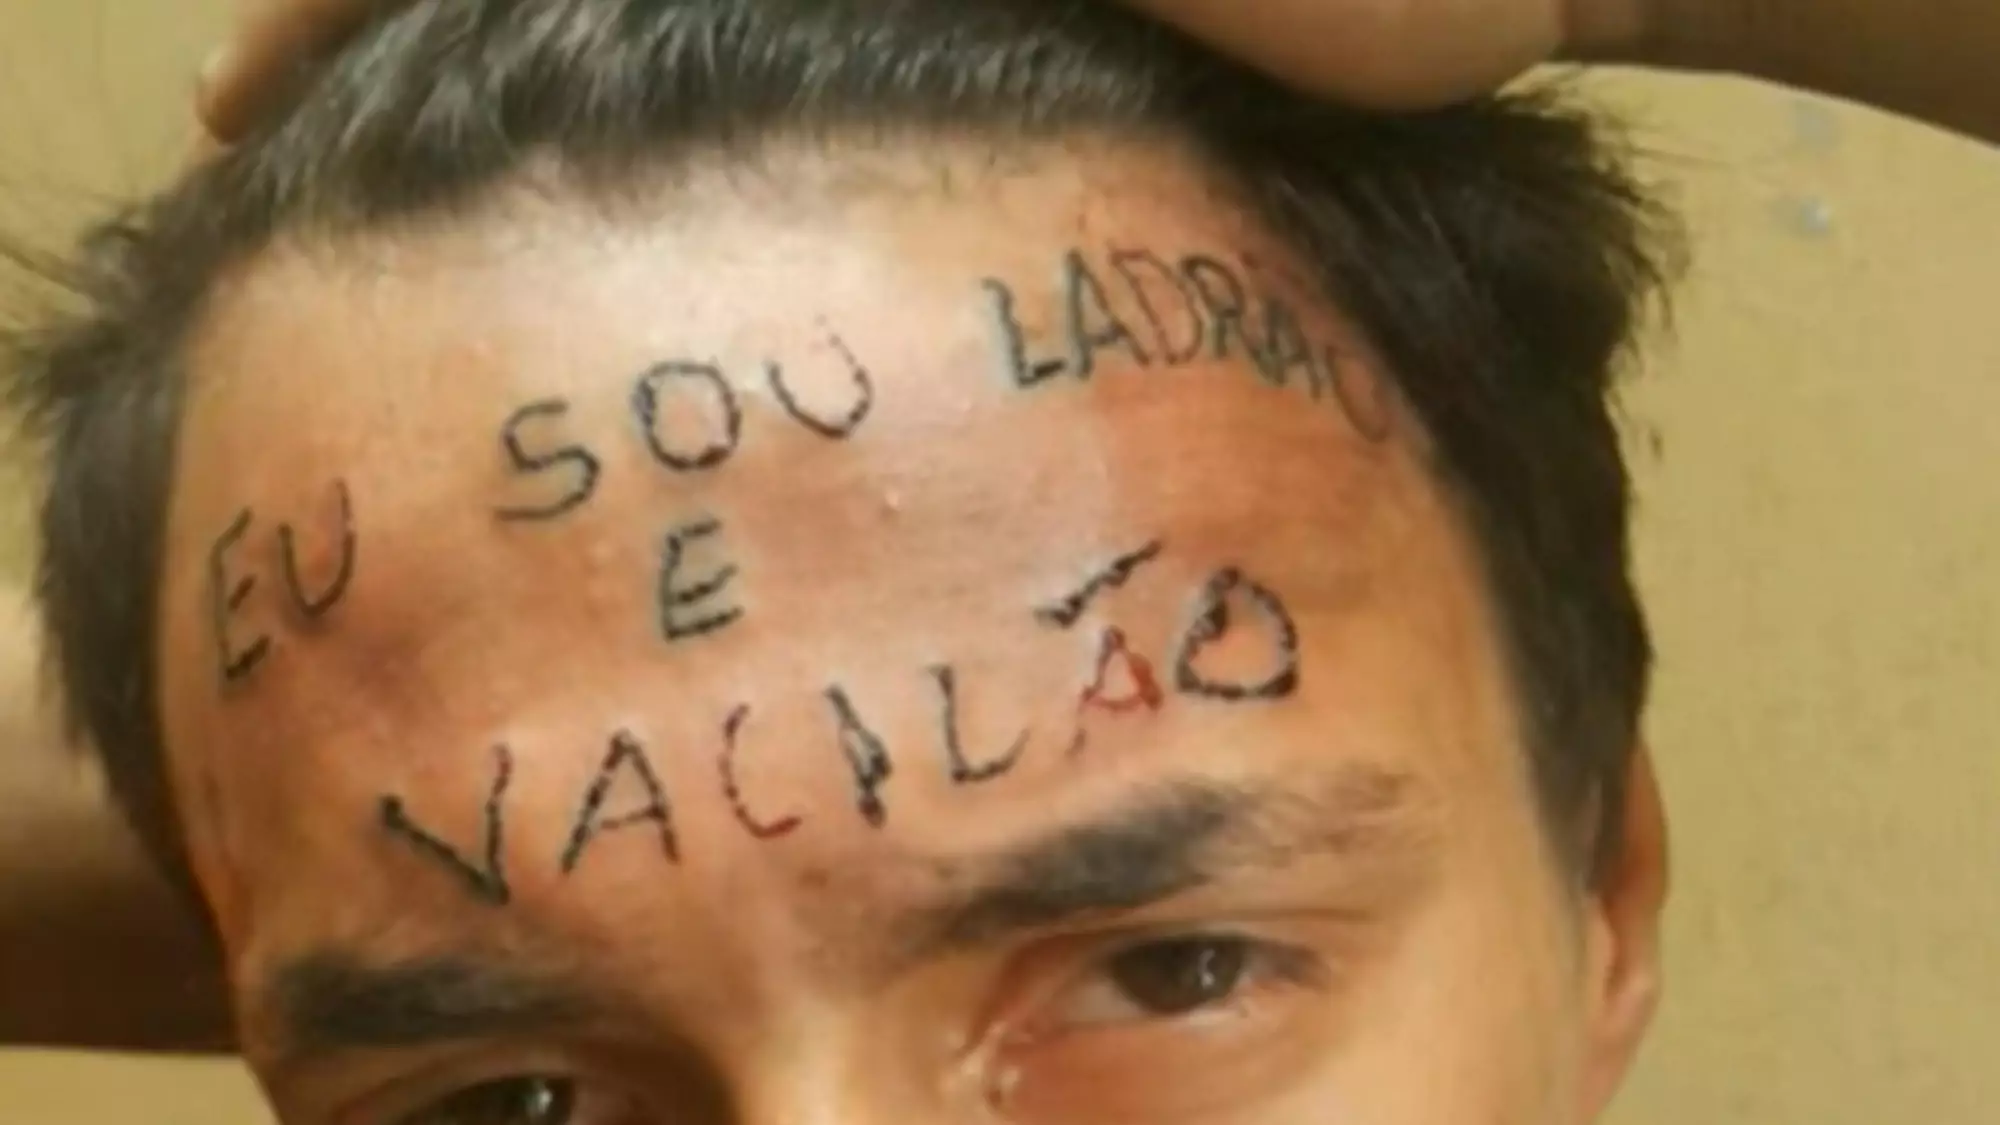 Man With 'I'm A Thief' Tattooed On His Head Arrested For Stealing